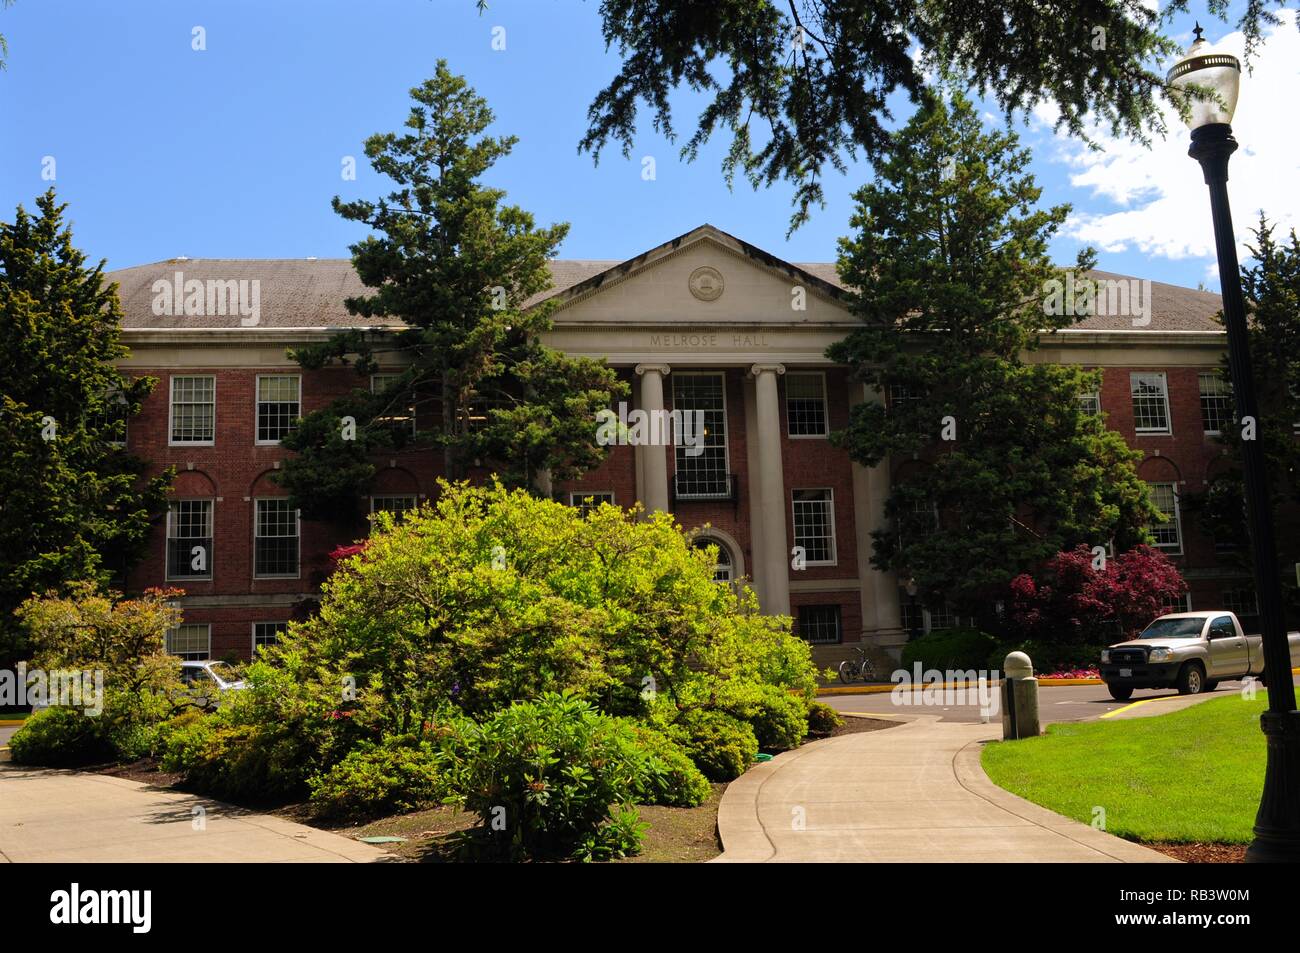 The Melrose Hall building on the Linfield College campus in McMinnville, Oregon. Stock Photo